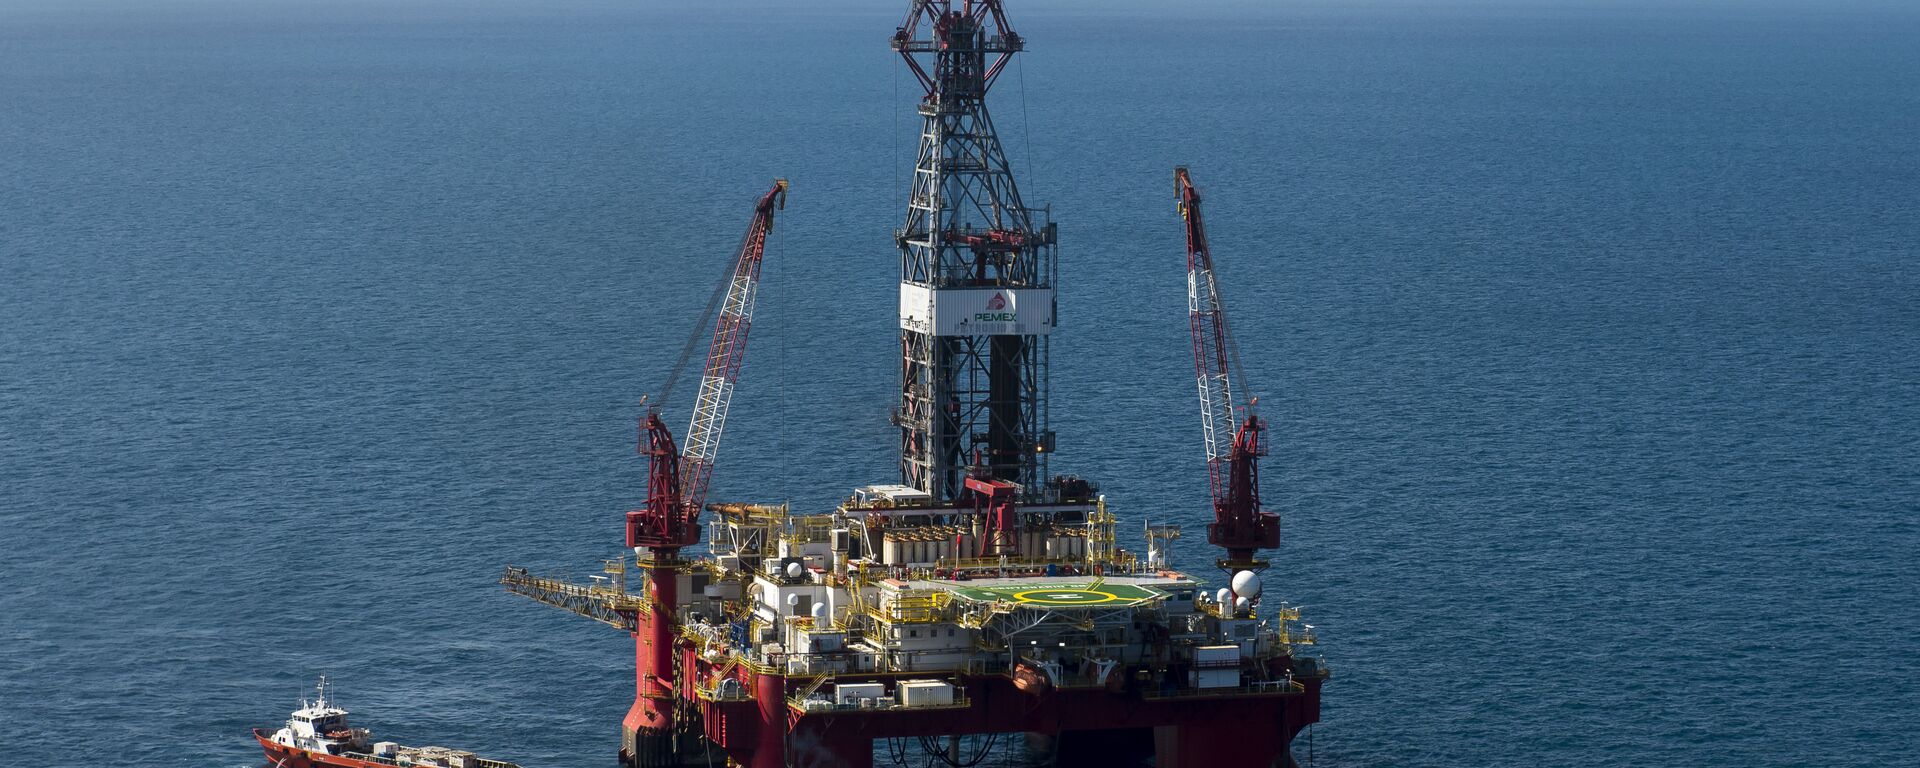 Aerial view of the Centenario exploration oil rig, operated by Mexican company Grupo R and working for Mexico's state-owned oil company PEMEX, in the Gulf of Mexico on August 30, 2013. - Sputnik Mundo, 1920, 18.03.2021